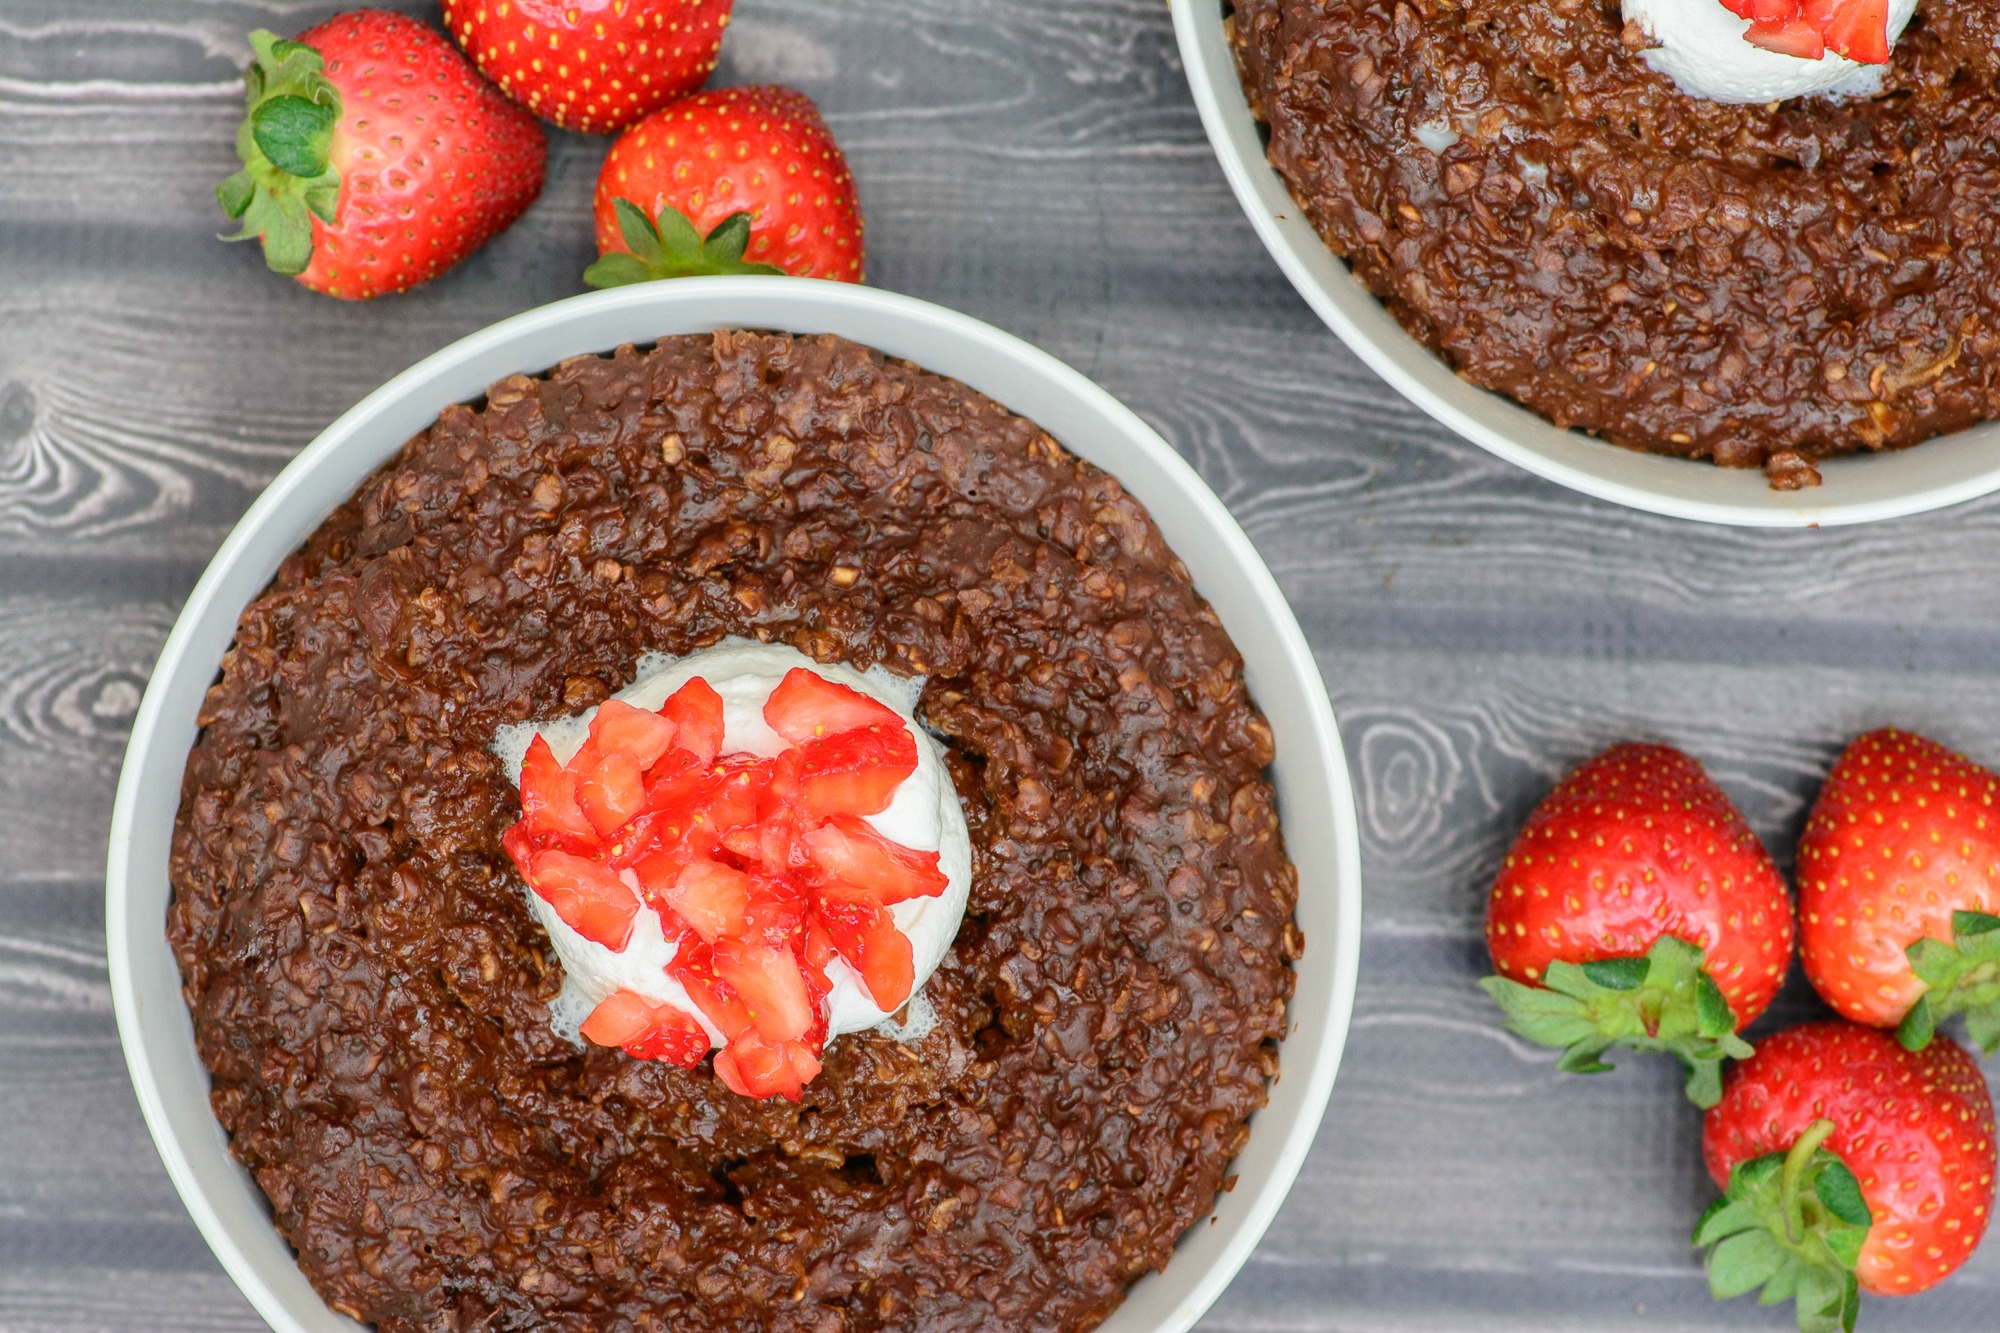 14 Perfect for Summer Paleo Strawberry Recipes